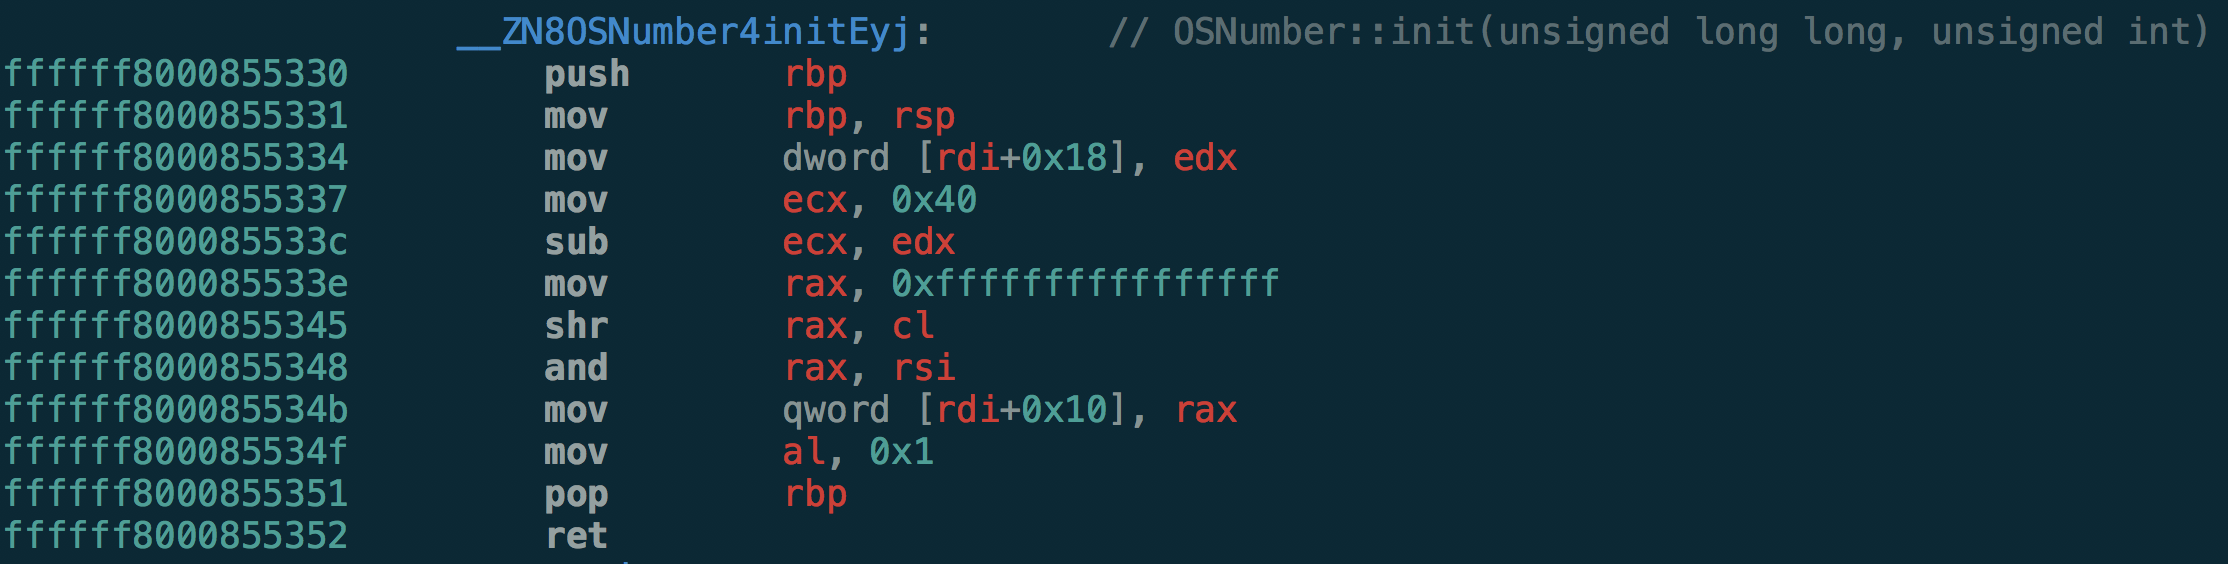 Disassembly of OSNumber::init(unsigned long long, unsigned int)